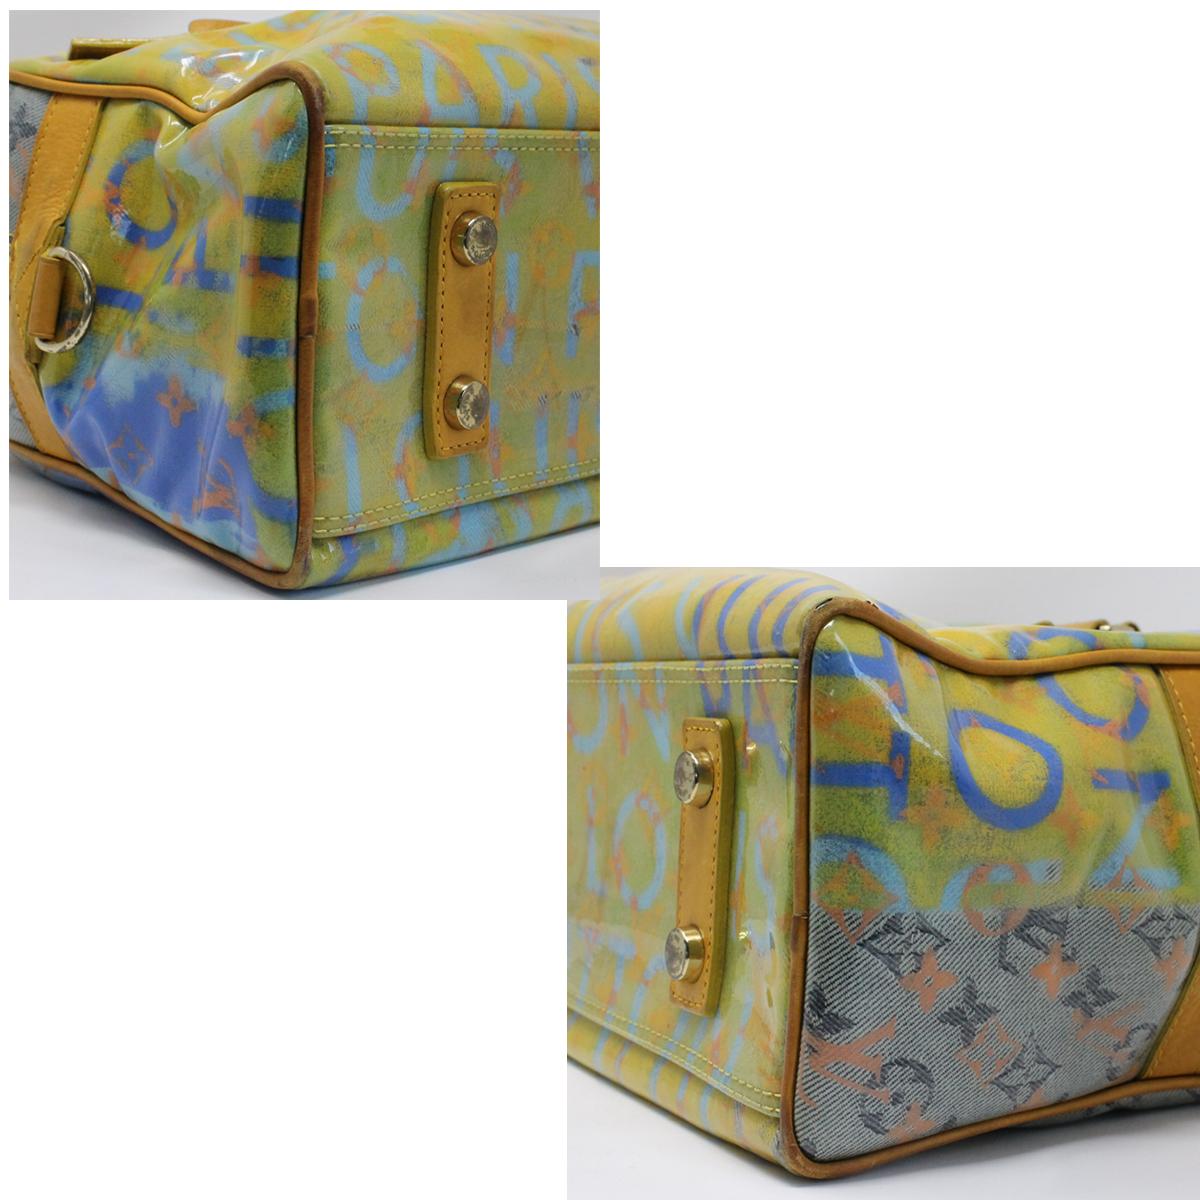 Brand: Louis Vuitton
Model: Richard Prince Jaune Denim Jaune
Size: Medium
Color: Multi – Yellow and Blue
Style: Weenender PM Bag
Date Code: MI1018
Materials: Denim Coated Exterior with Cowhide Leather Trim
Handles: Cowhide Leather Rolled handles;